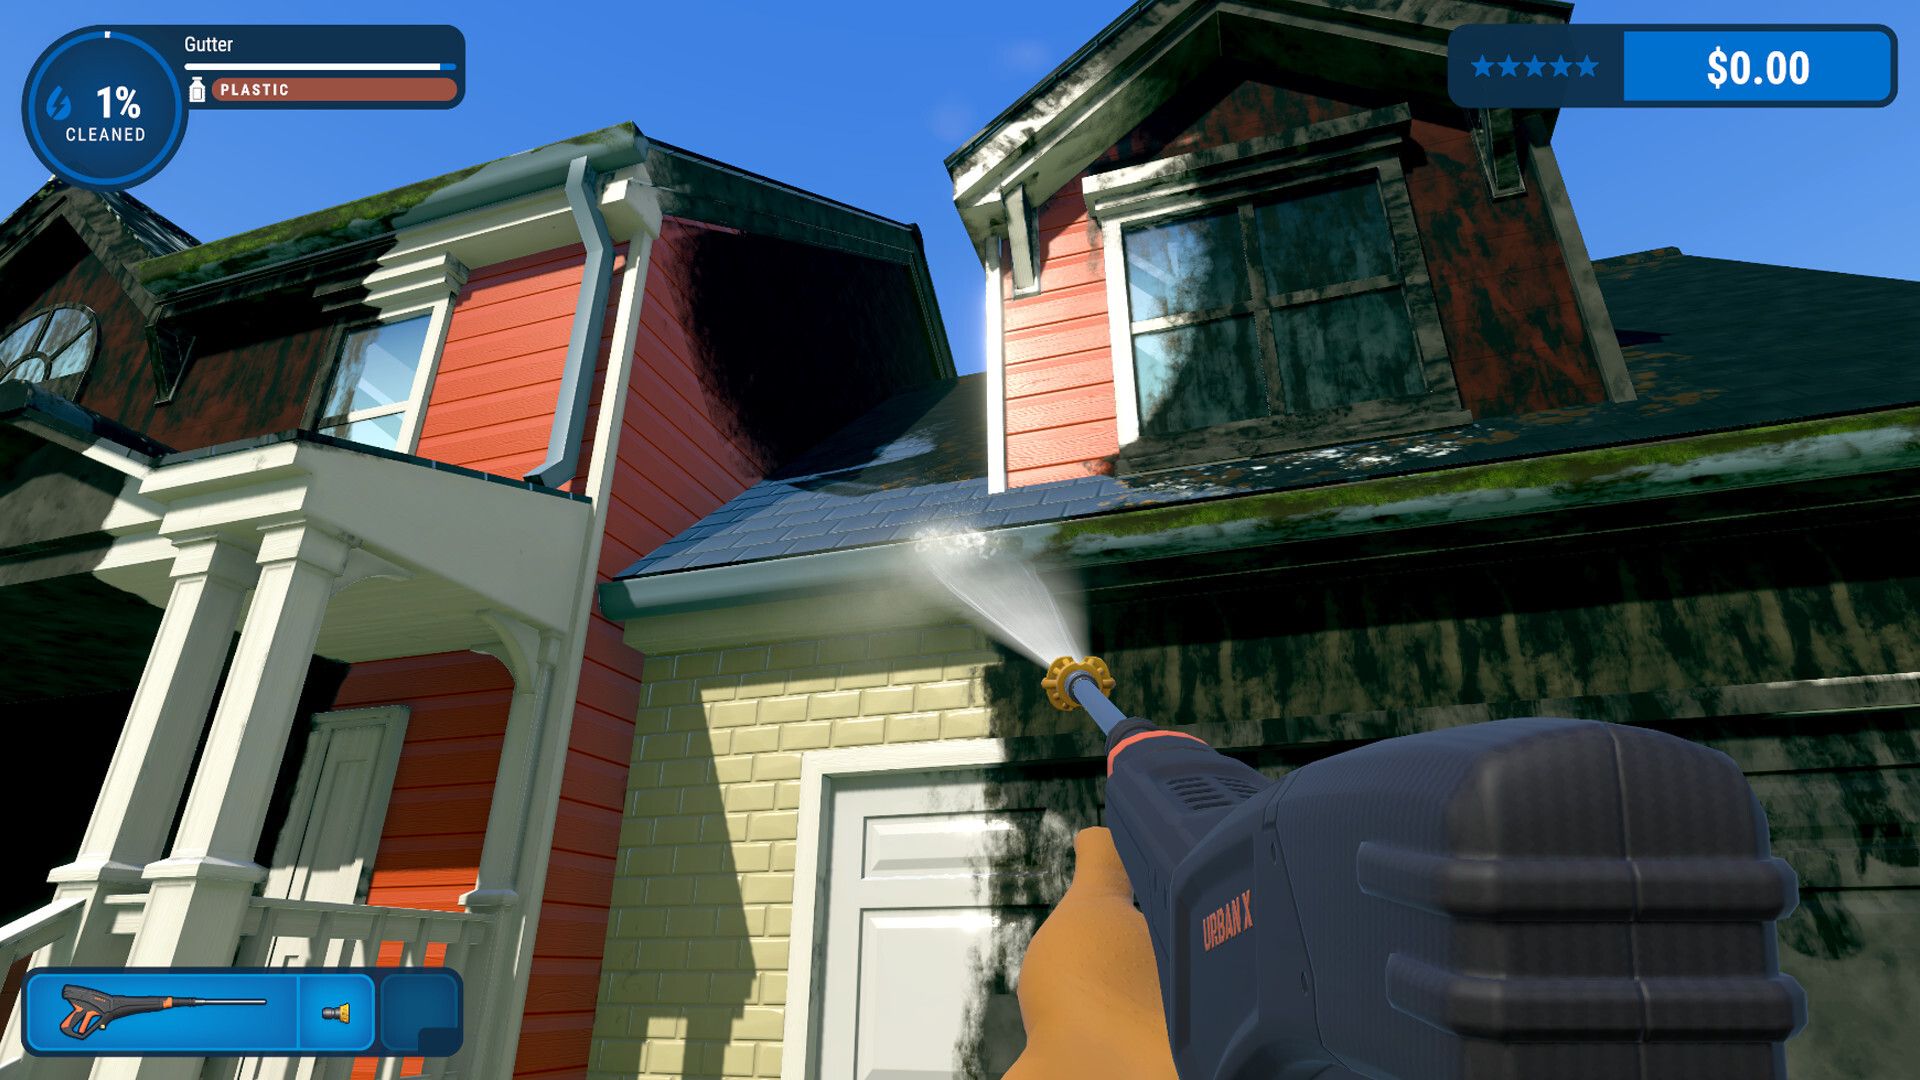 New PowerWash Simulator game captures the catharsis of cleaning